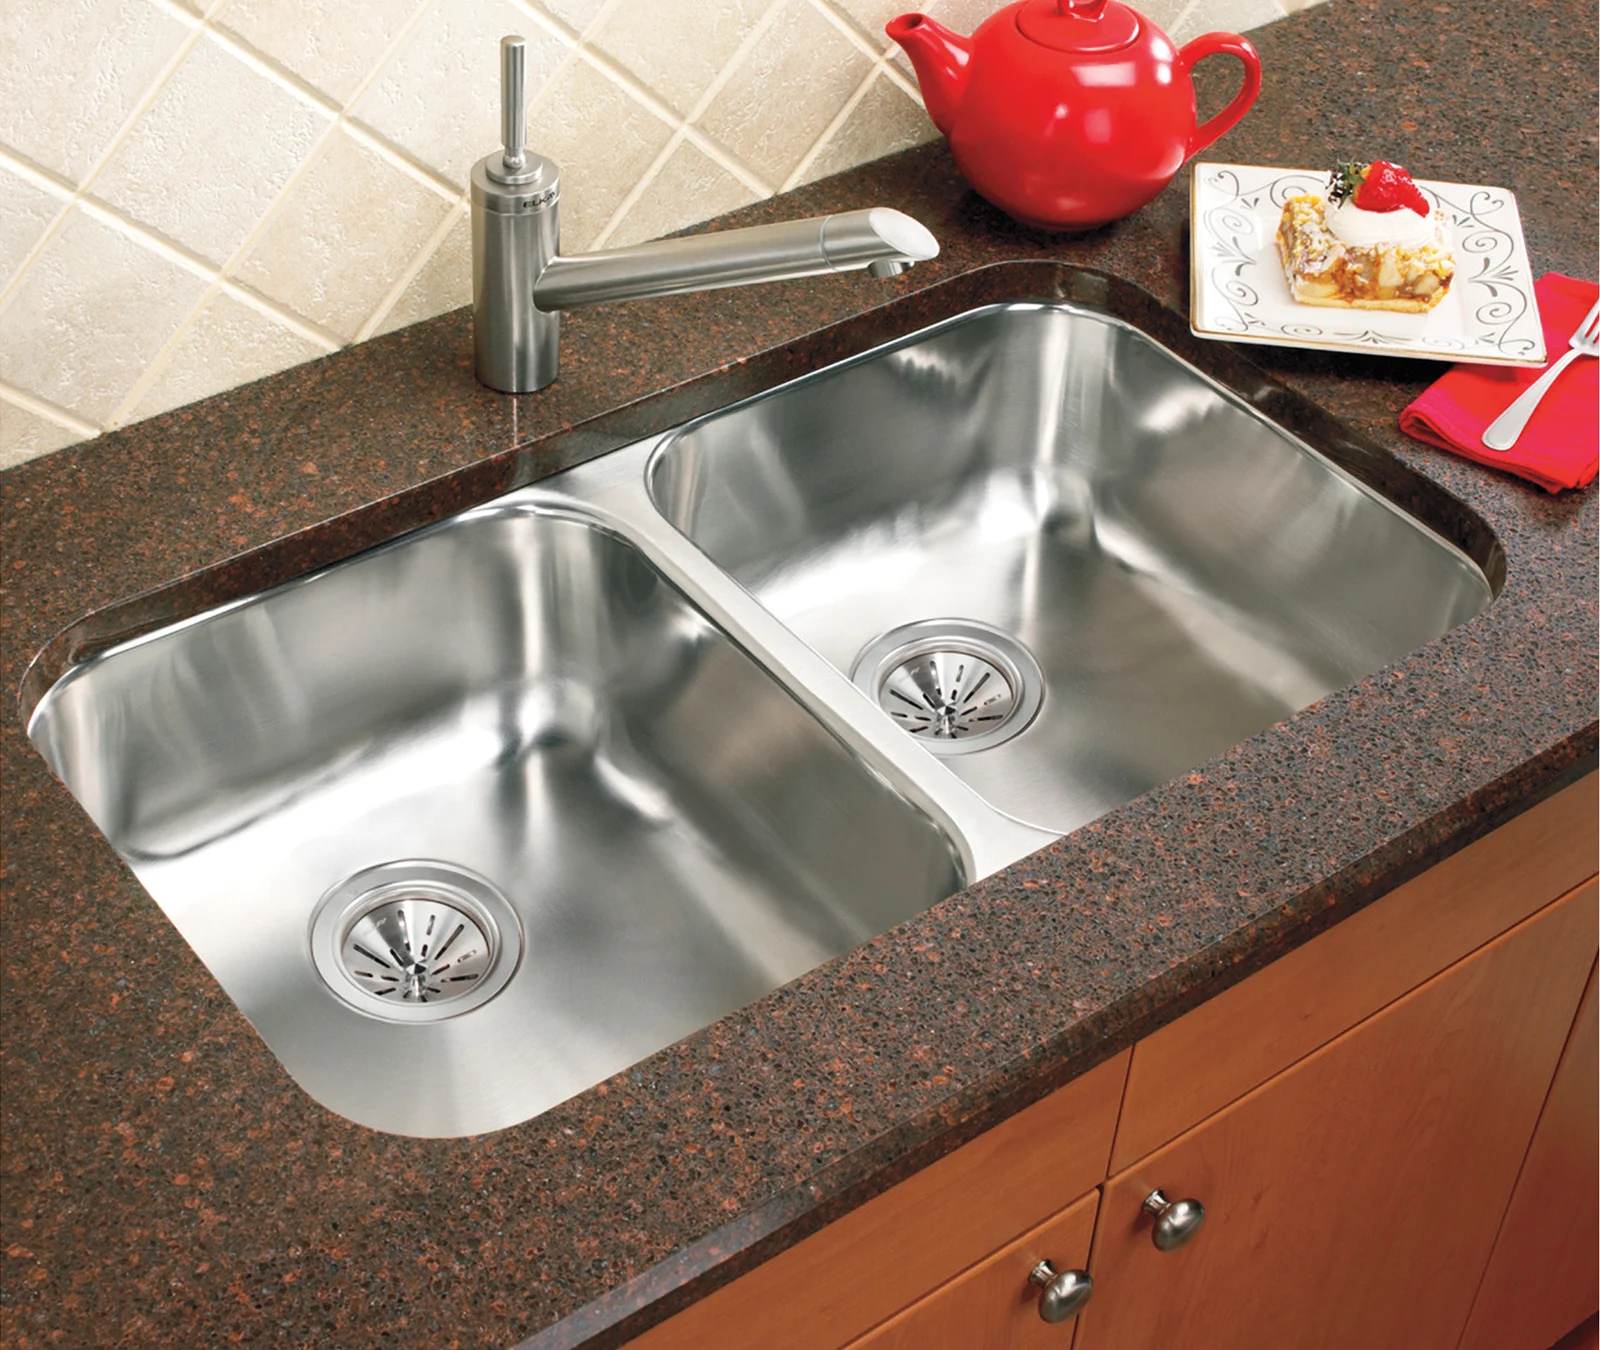 Here's How to Pick the Best Kitchen Sink